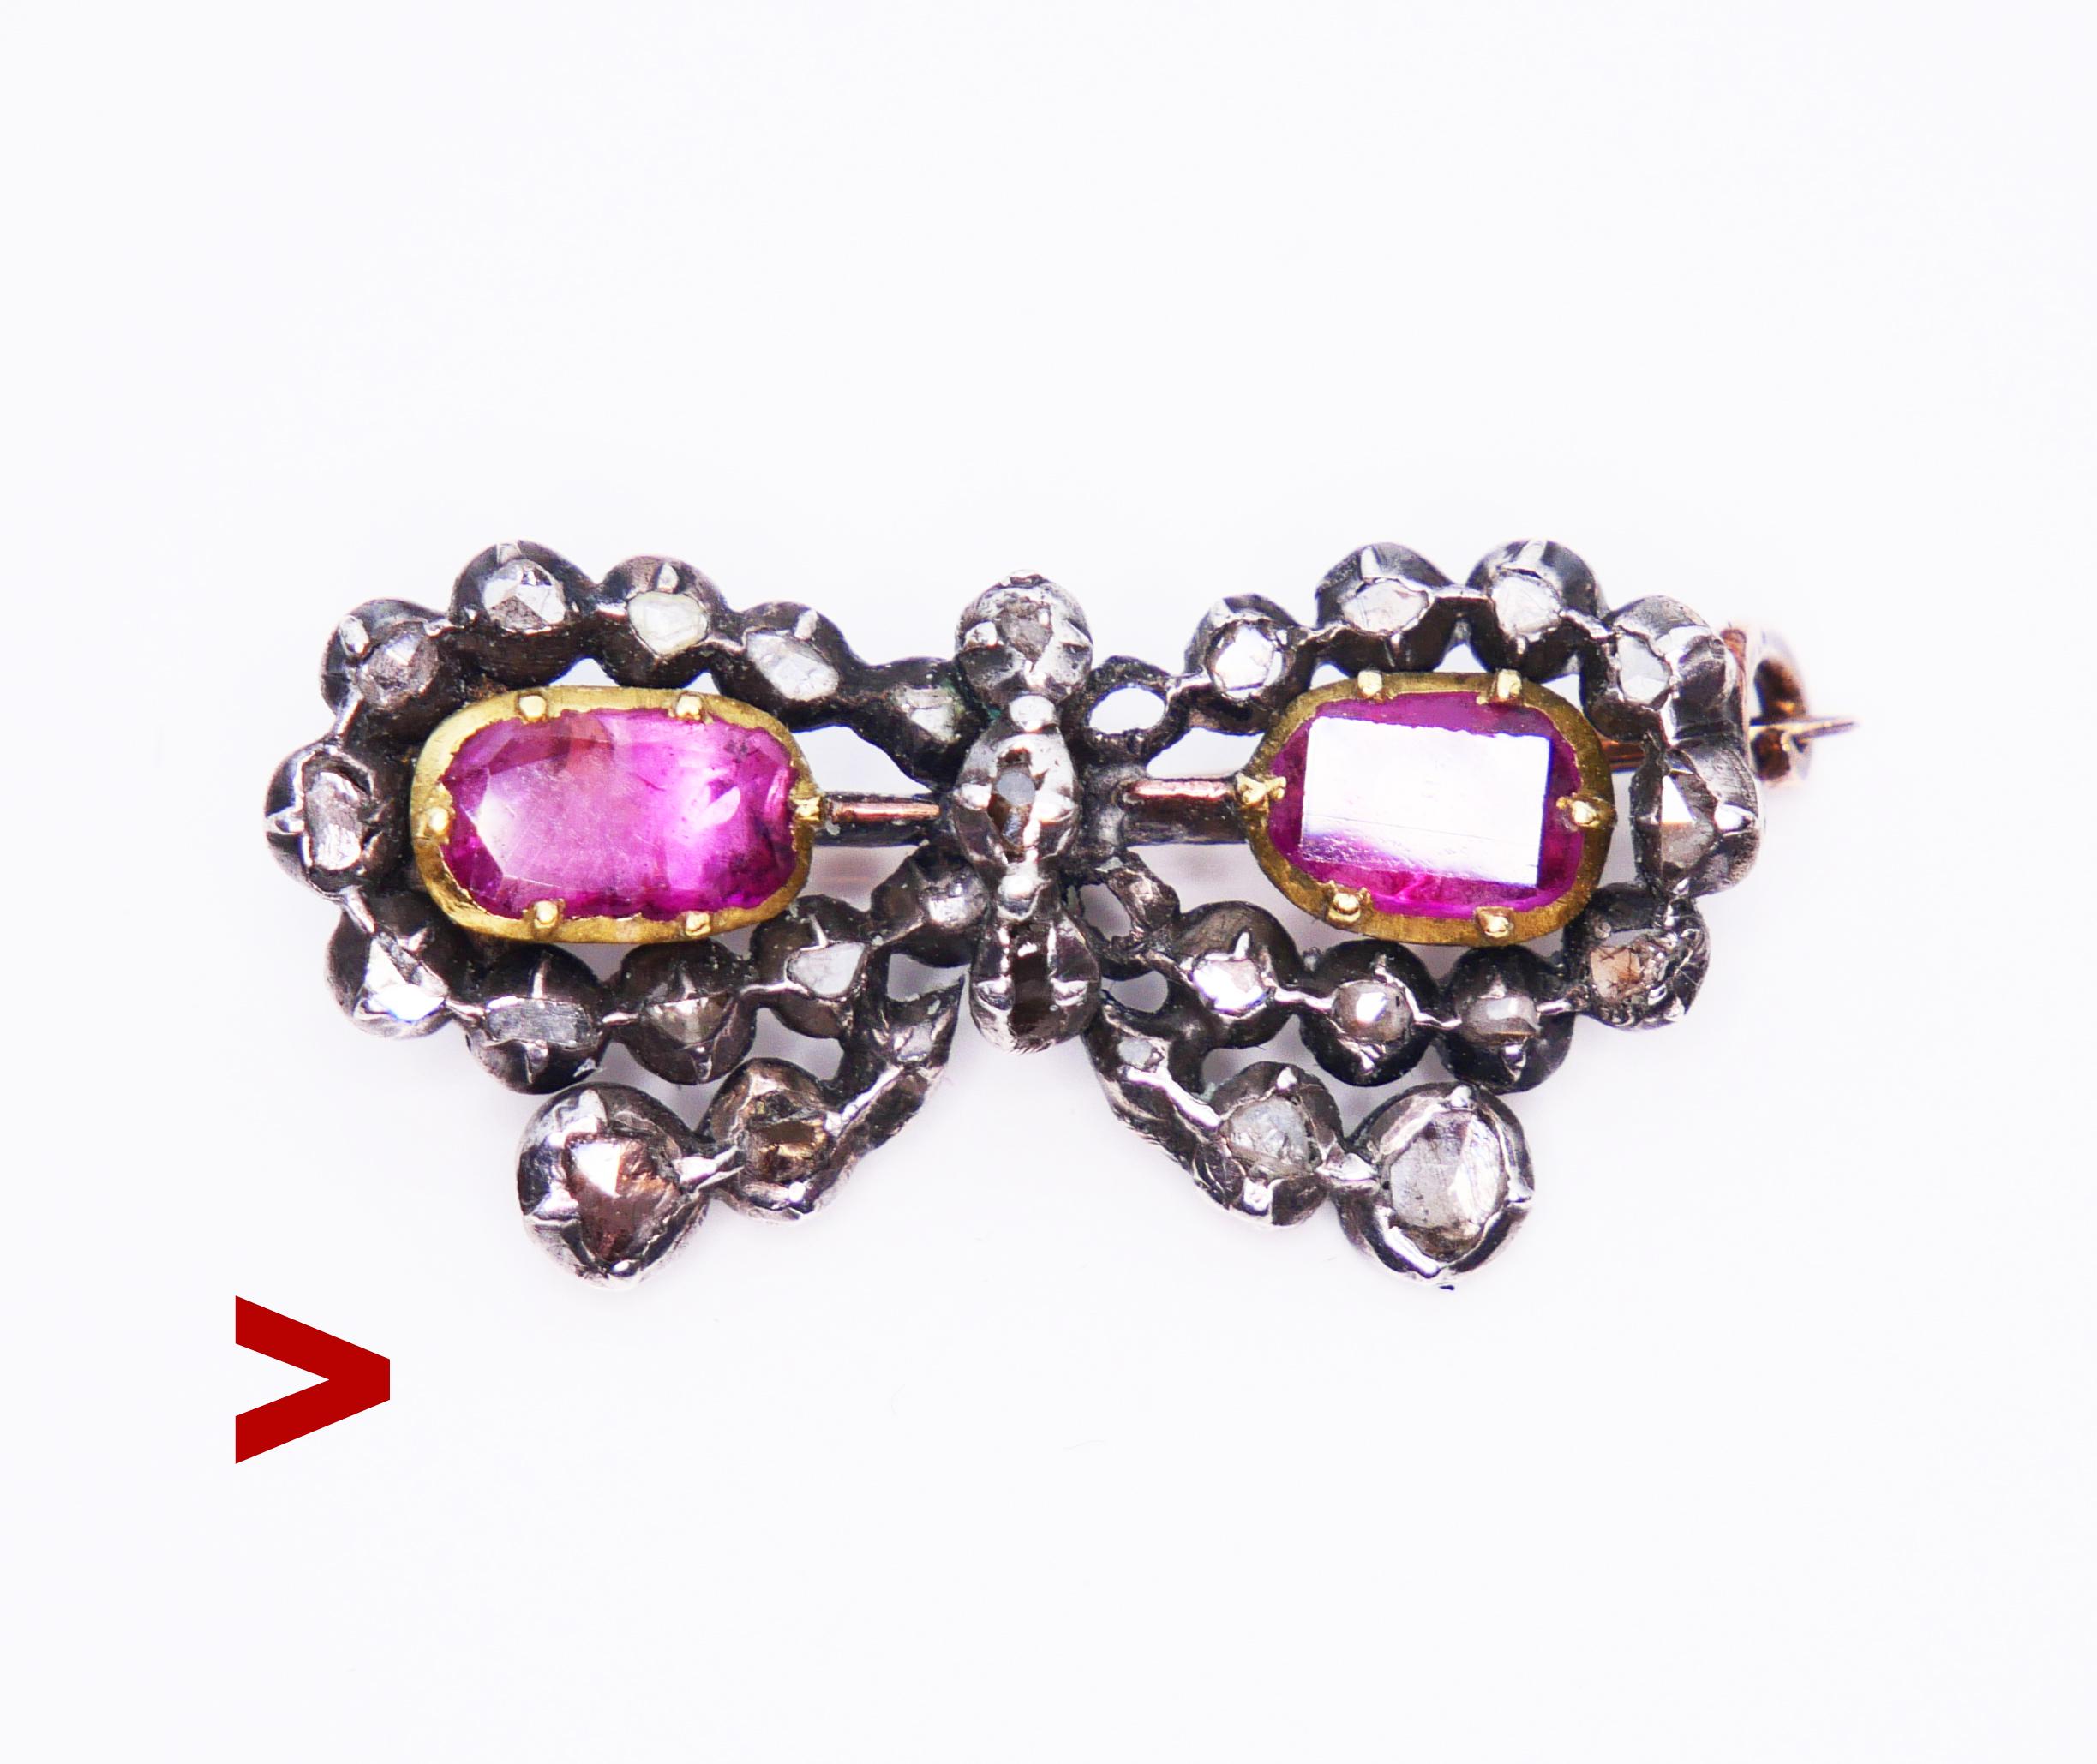 Old European Butterfly brooch dating from ca. 18th century with 2 natural Rubies and 29 sparkling rose cut Diamonds set in Silver , 10K Rose and Green Gold.

One Ruby is of old table cut 7 mm x 5 mm / ca. 1 ct , second Ruby is of sort of